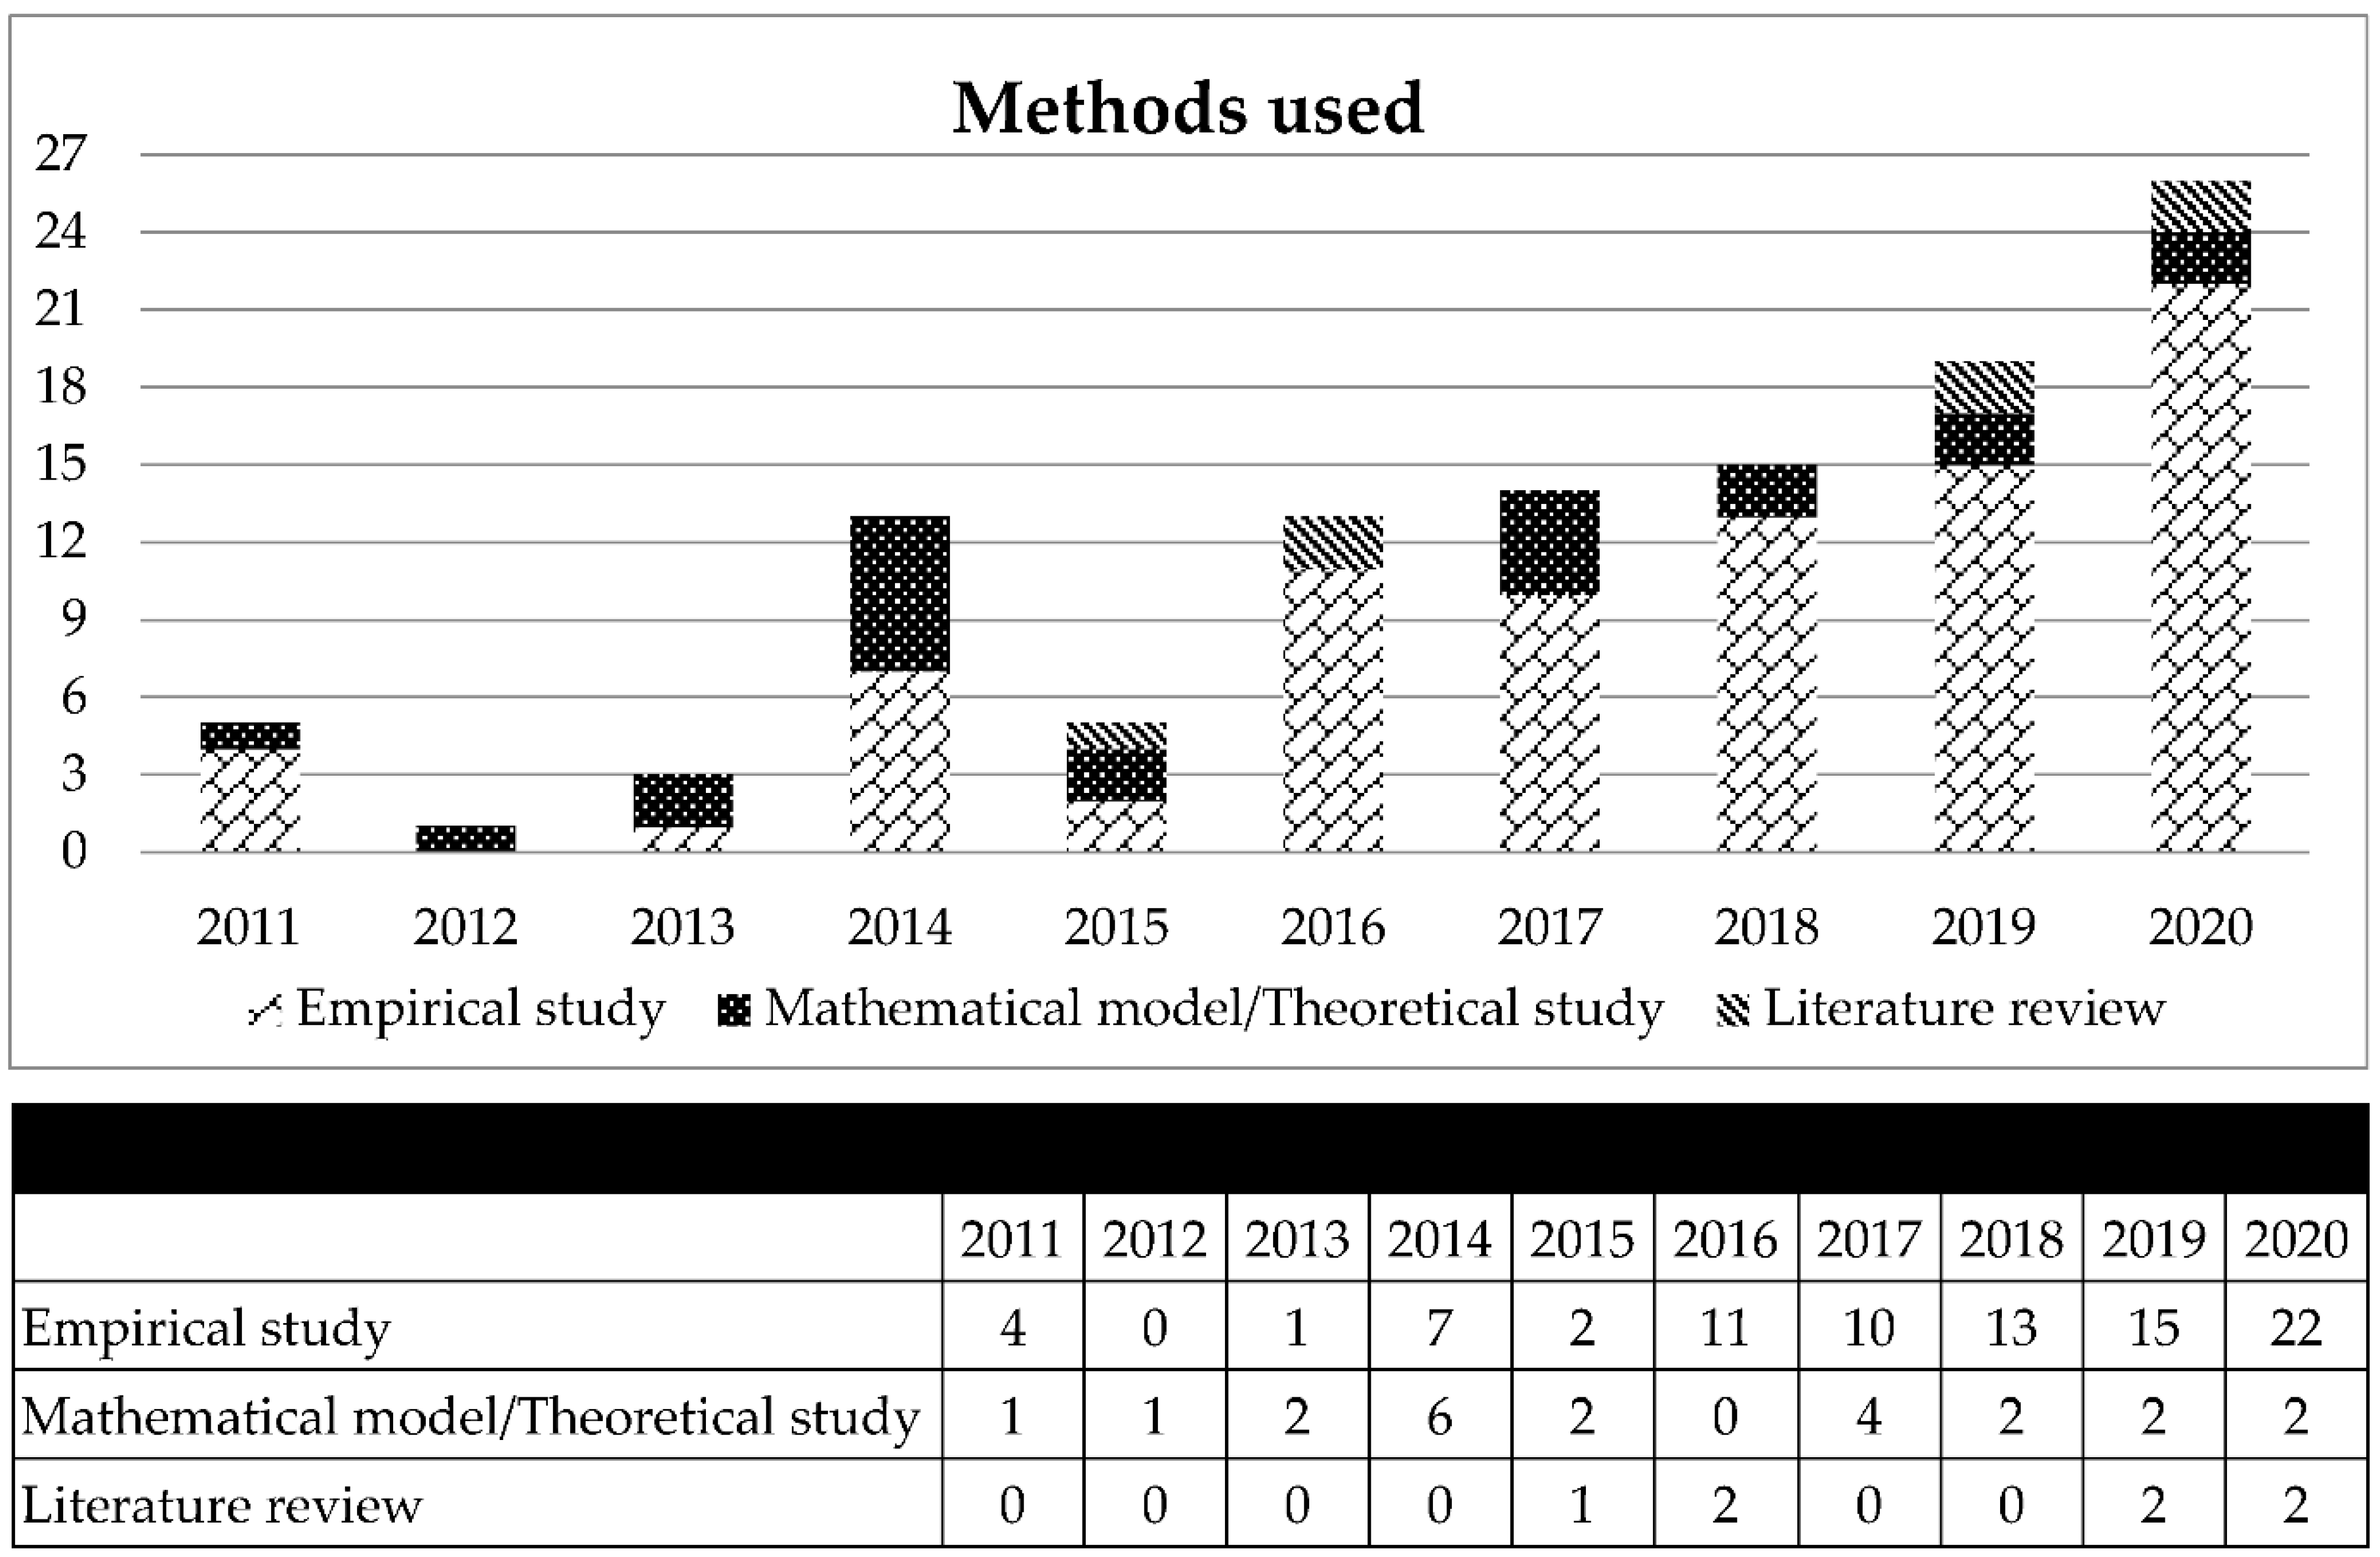 https://pub.mdpi-res.com/sustainability/sustainability-14-13771/article_deploy/html/images/sustainability-14-13771-g007.png?1666847964